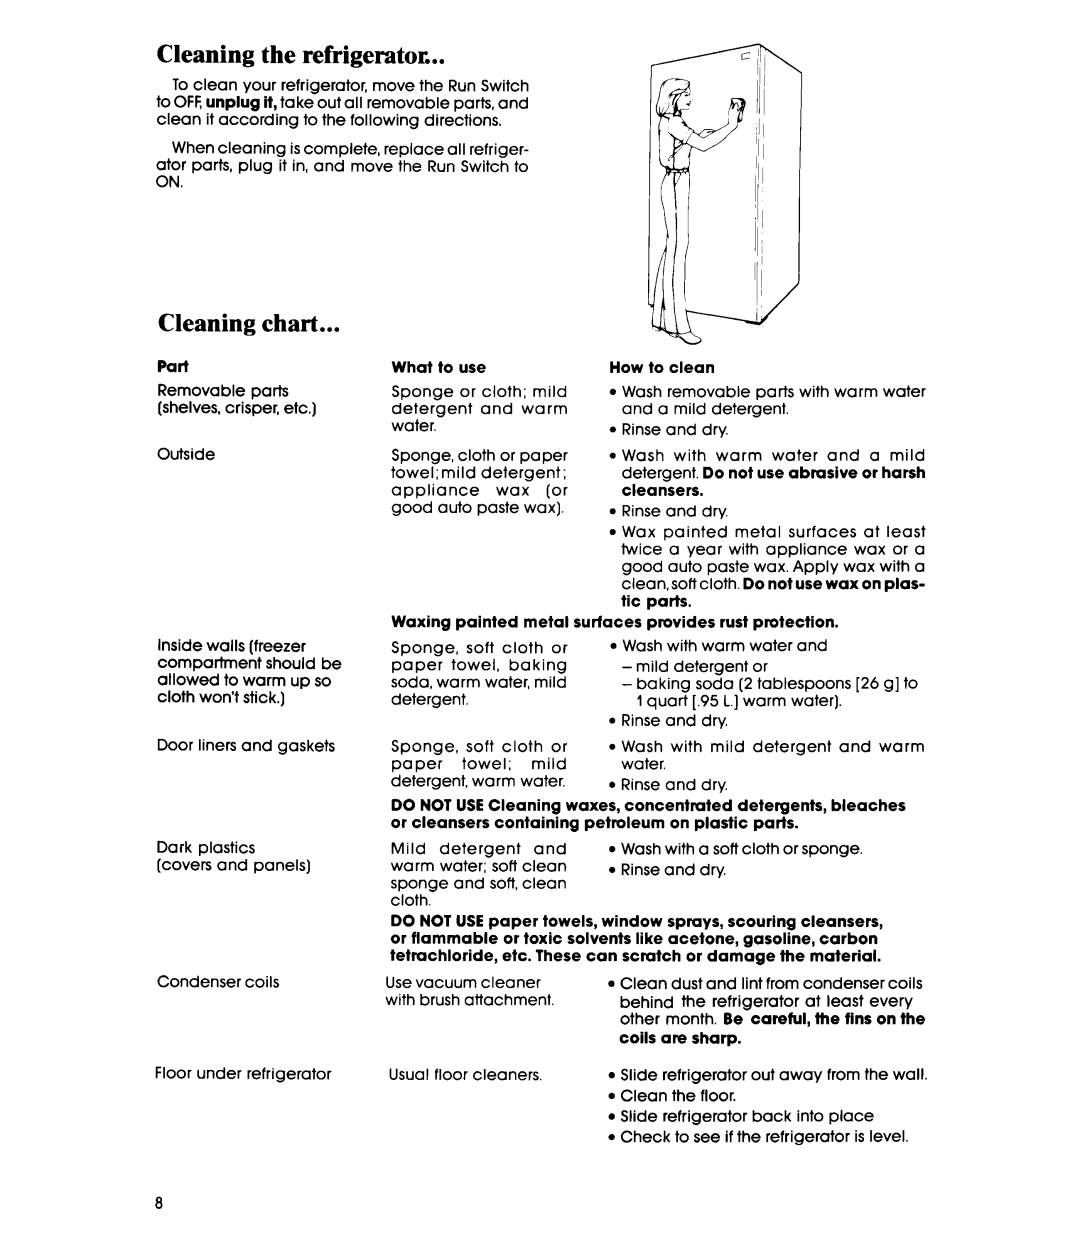 Whirlpool EL15SC manual Cleaning the refrigerator, Cleaning chart 